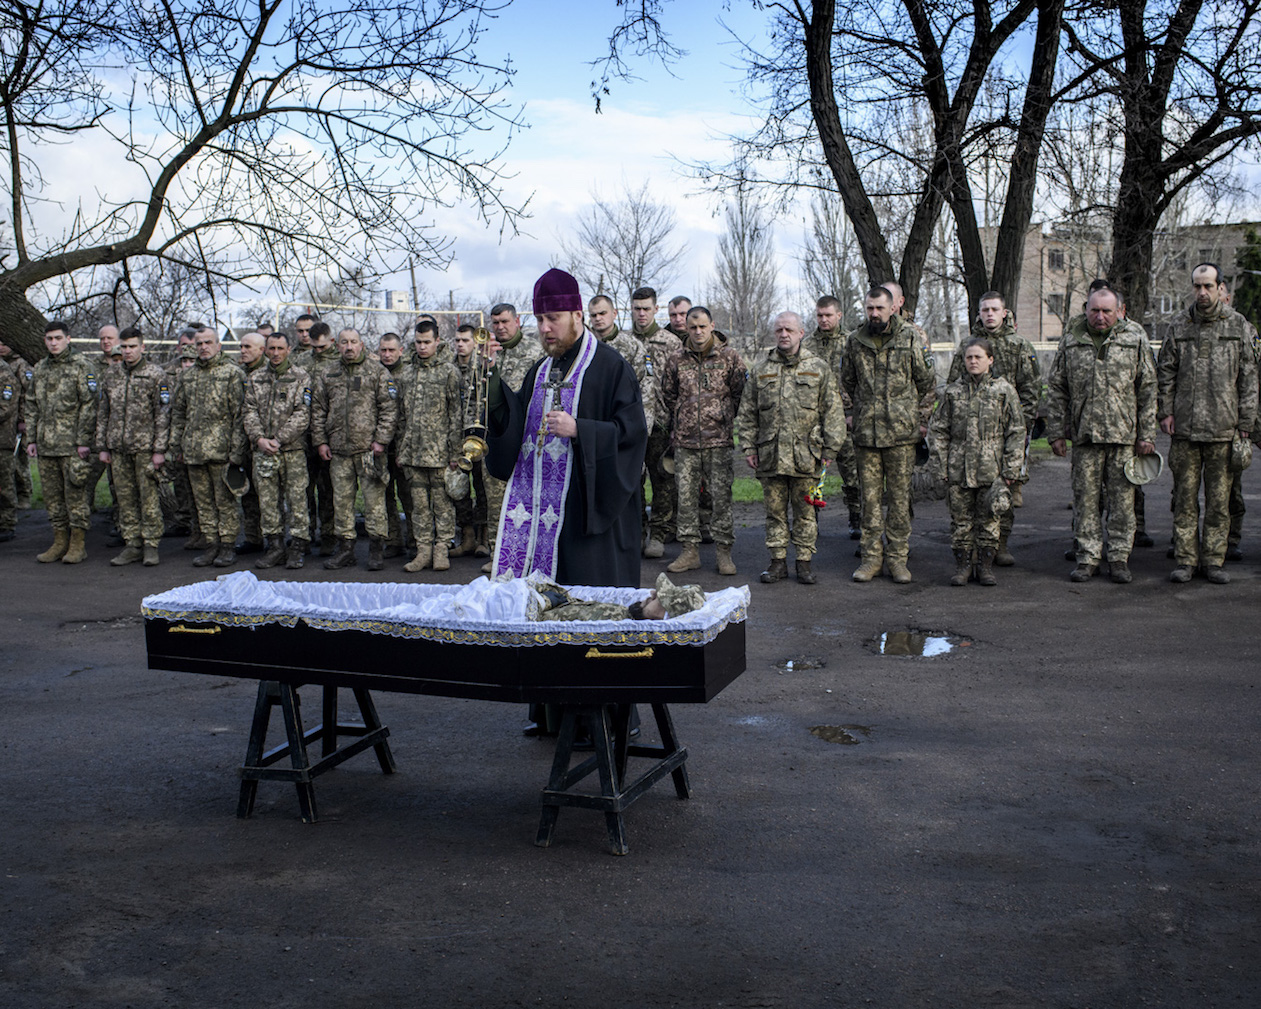 Ukraine, Donbas, Torez, 24 April 2021 Torez mortuary. Soldiers of the Edelweiss Brigade of the Ukrainian Army pay their last respects to soldat Alexander Youtsik who died at the age of 38 on 22 April 2021.